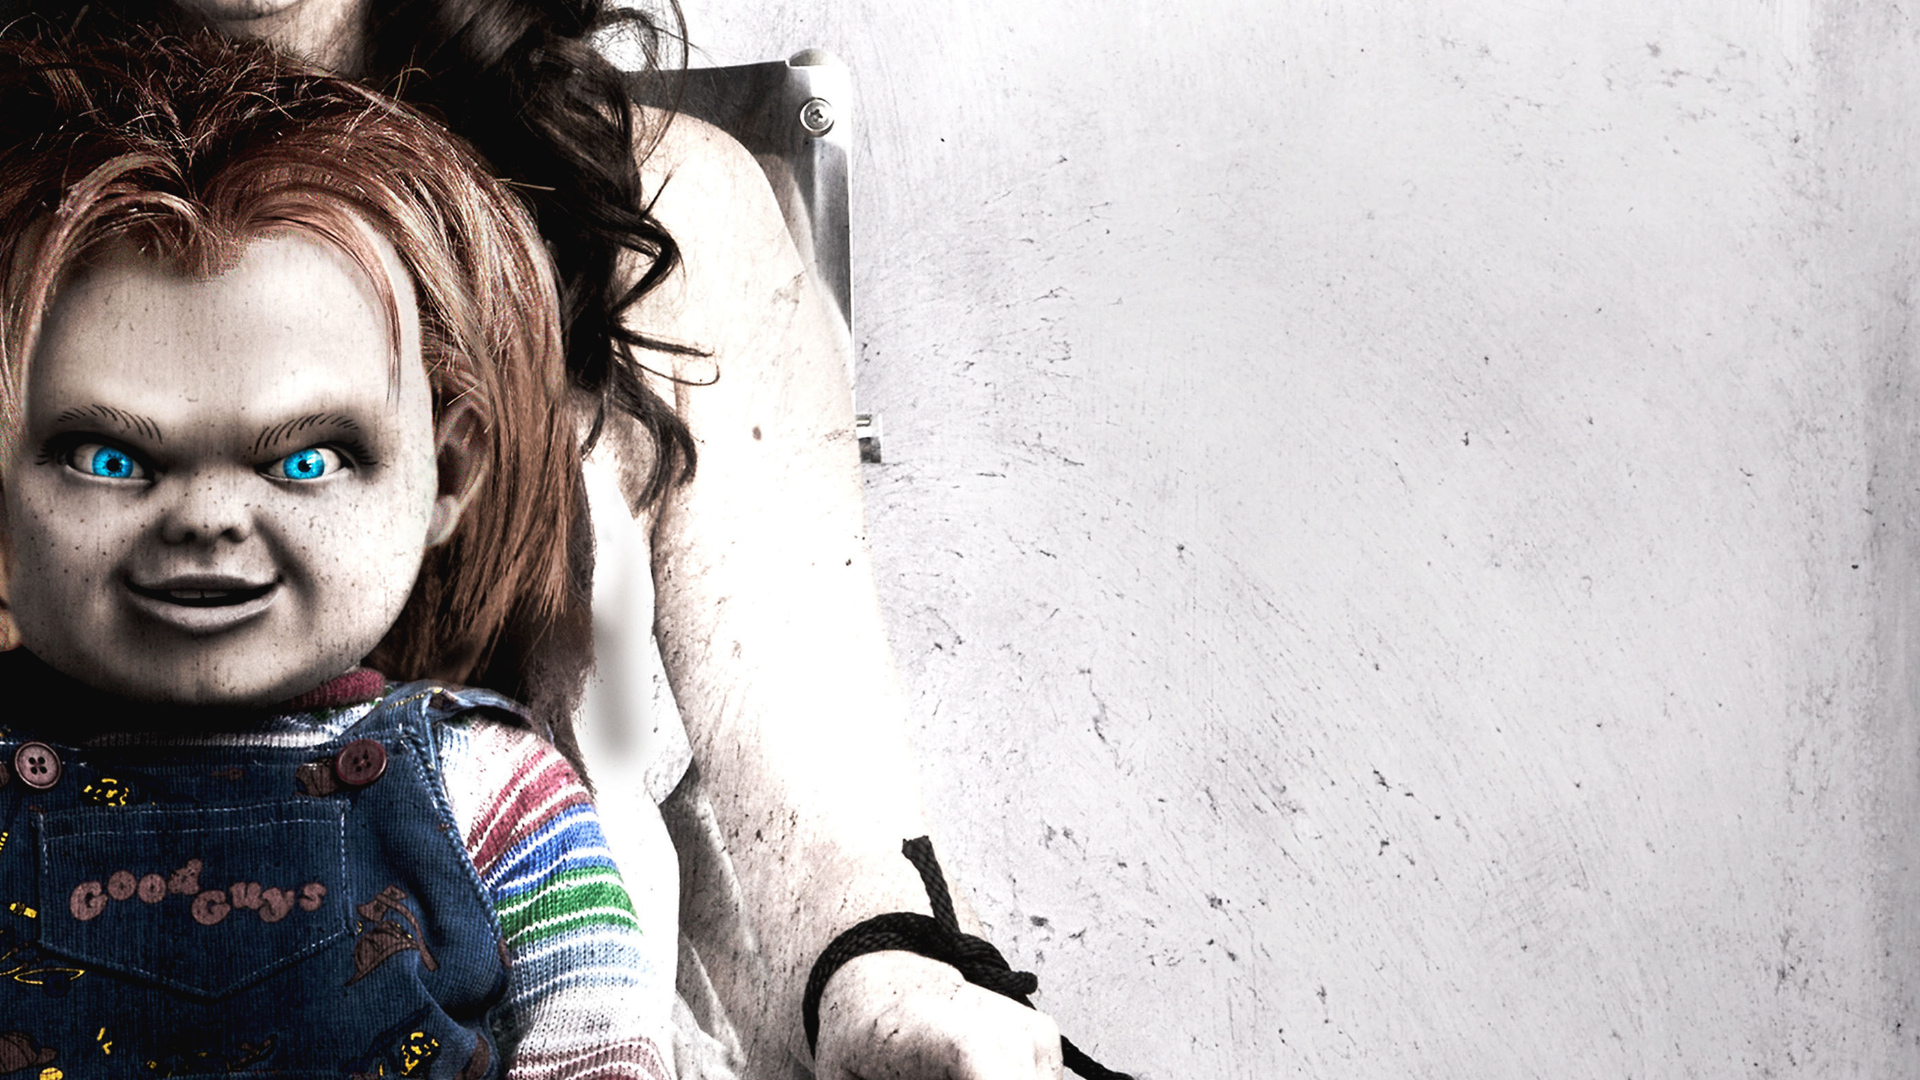 See more scary chucky wallpapers, chucky wallpaper, chucky backgrounds, jas...